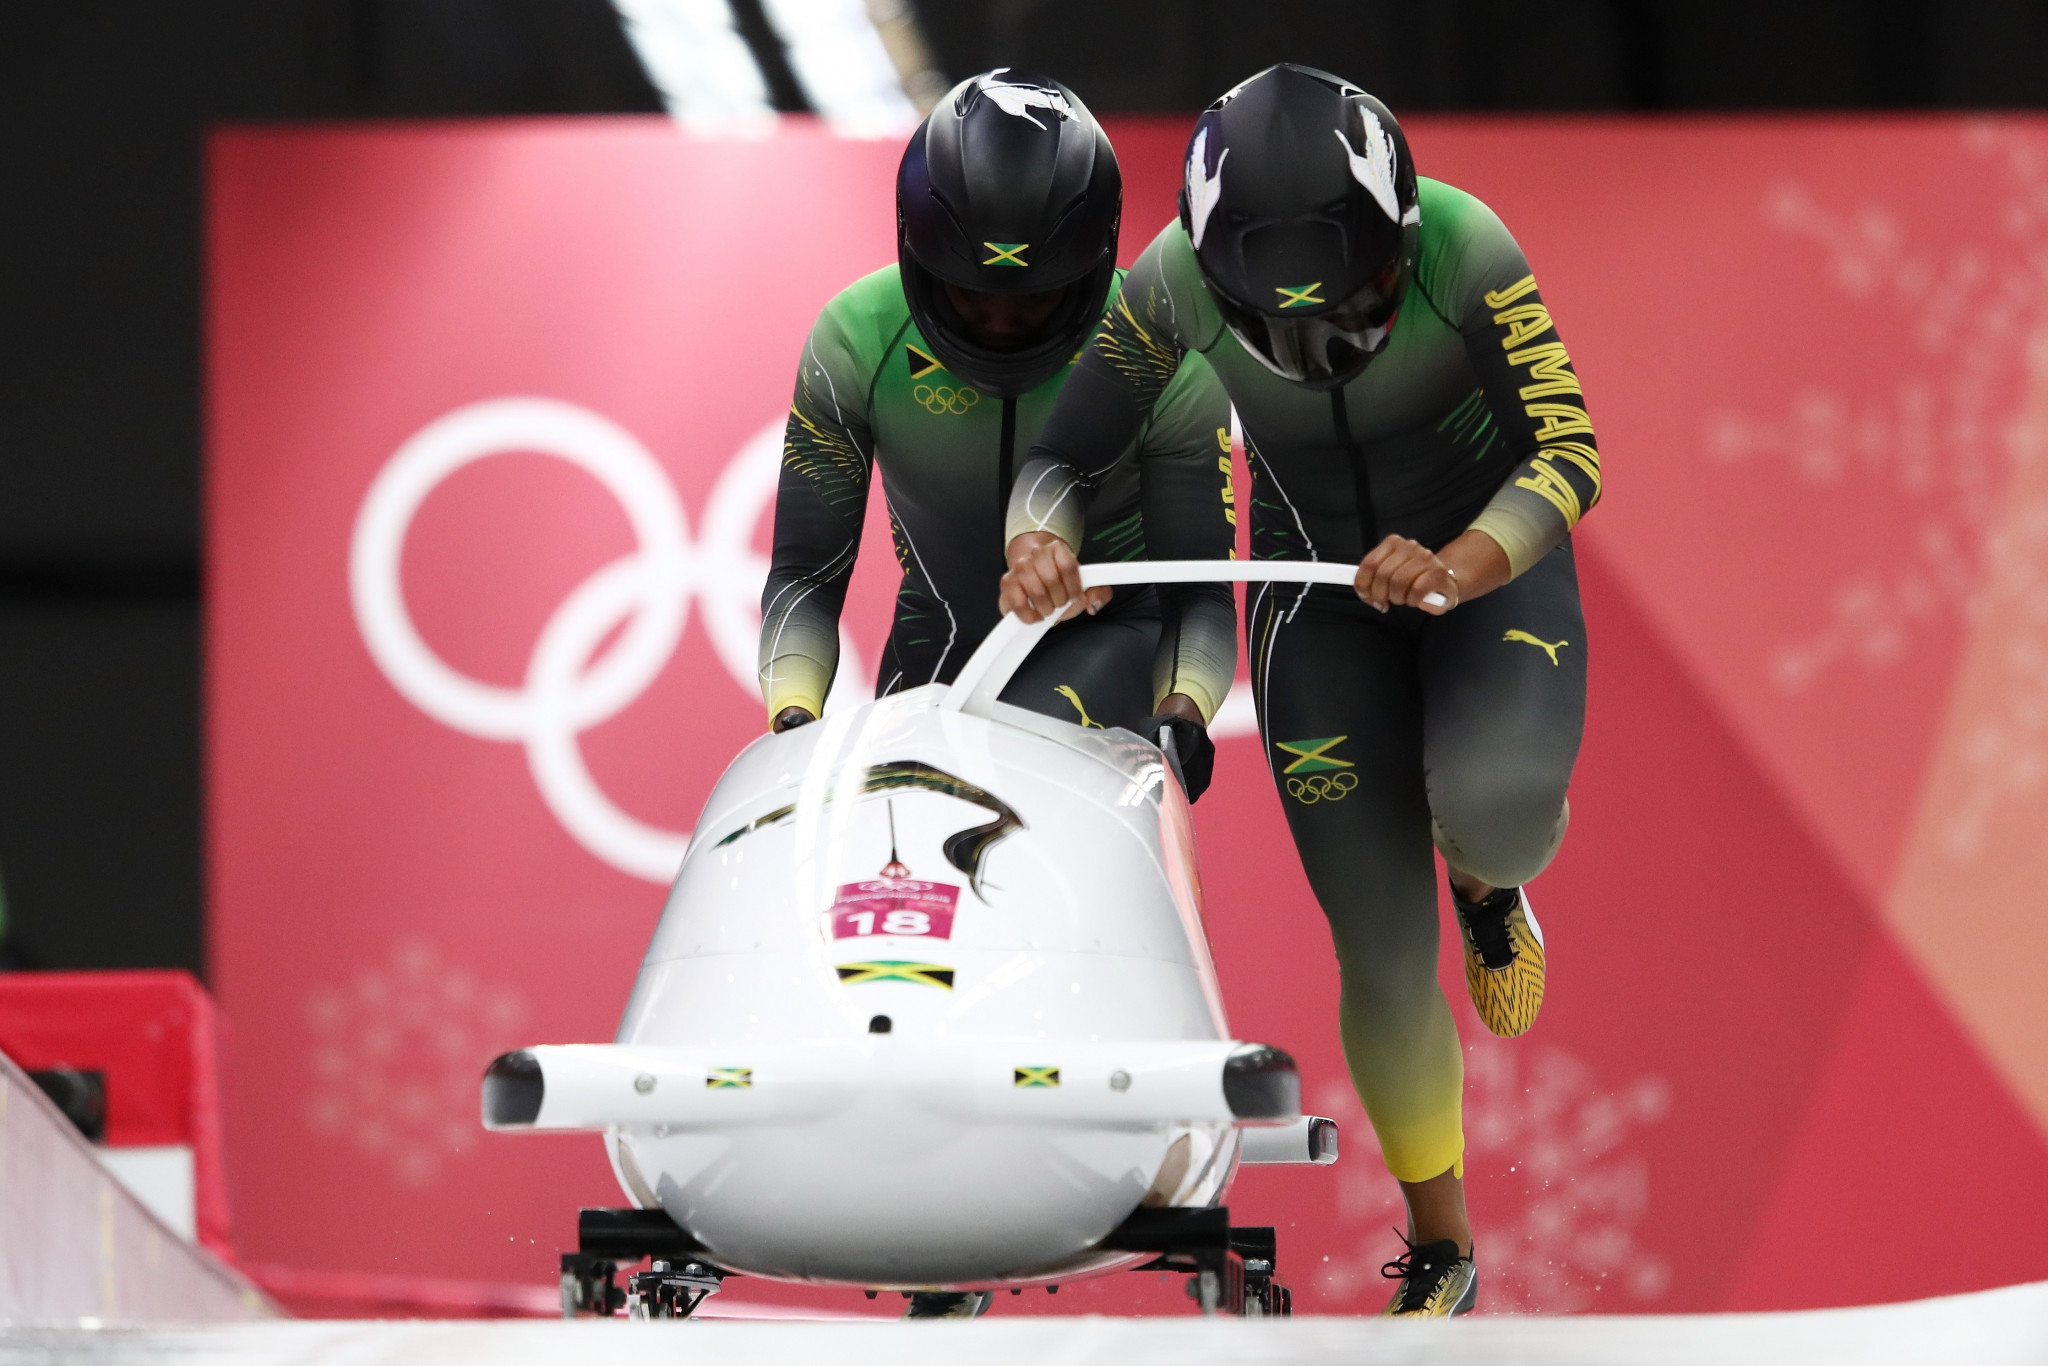 Convicted doper Fenlator-Victorian poised to represent Jamaica at second Winter Olympics